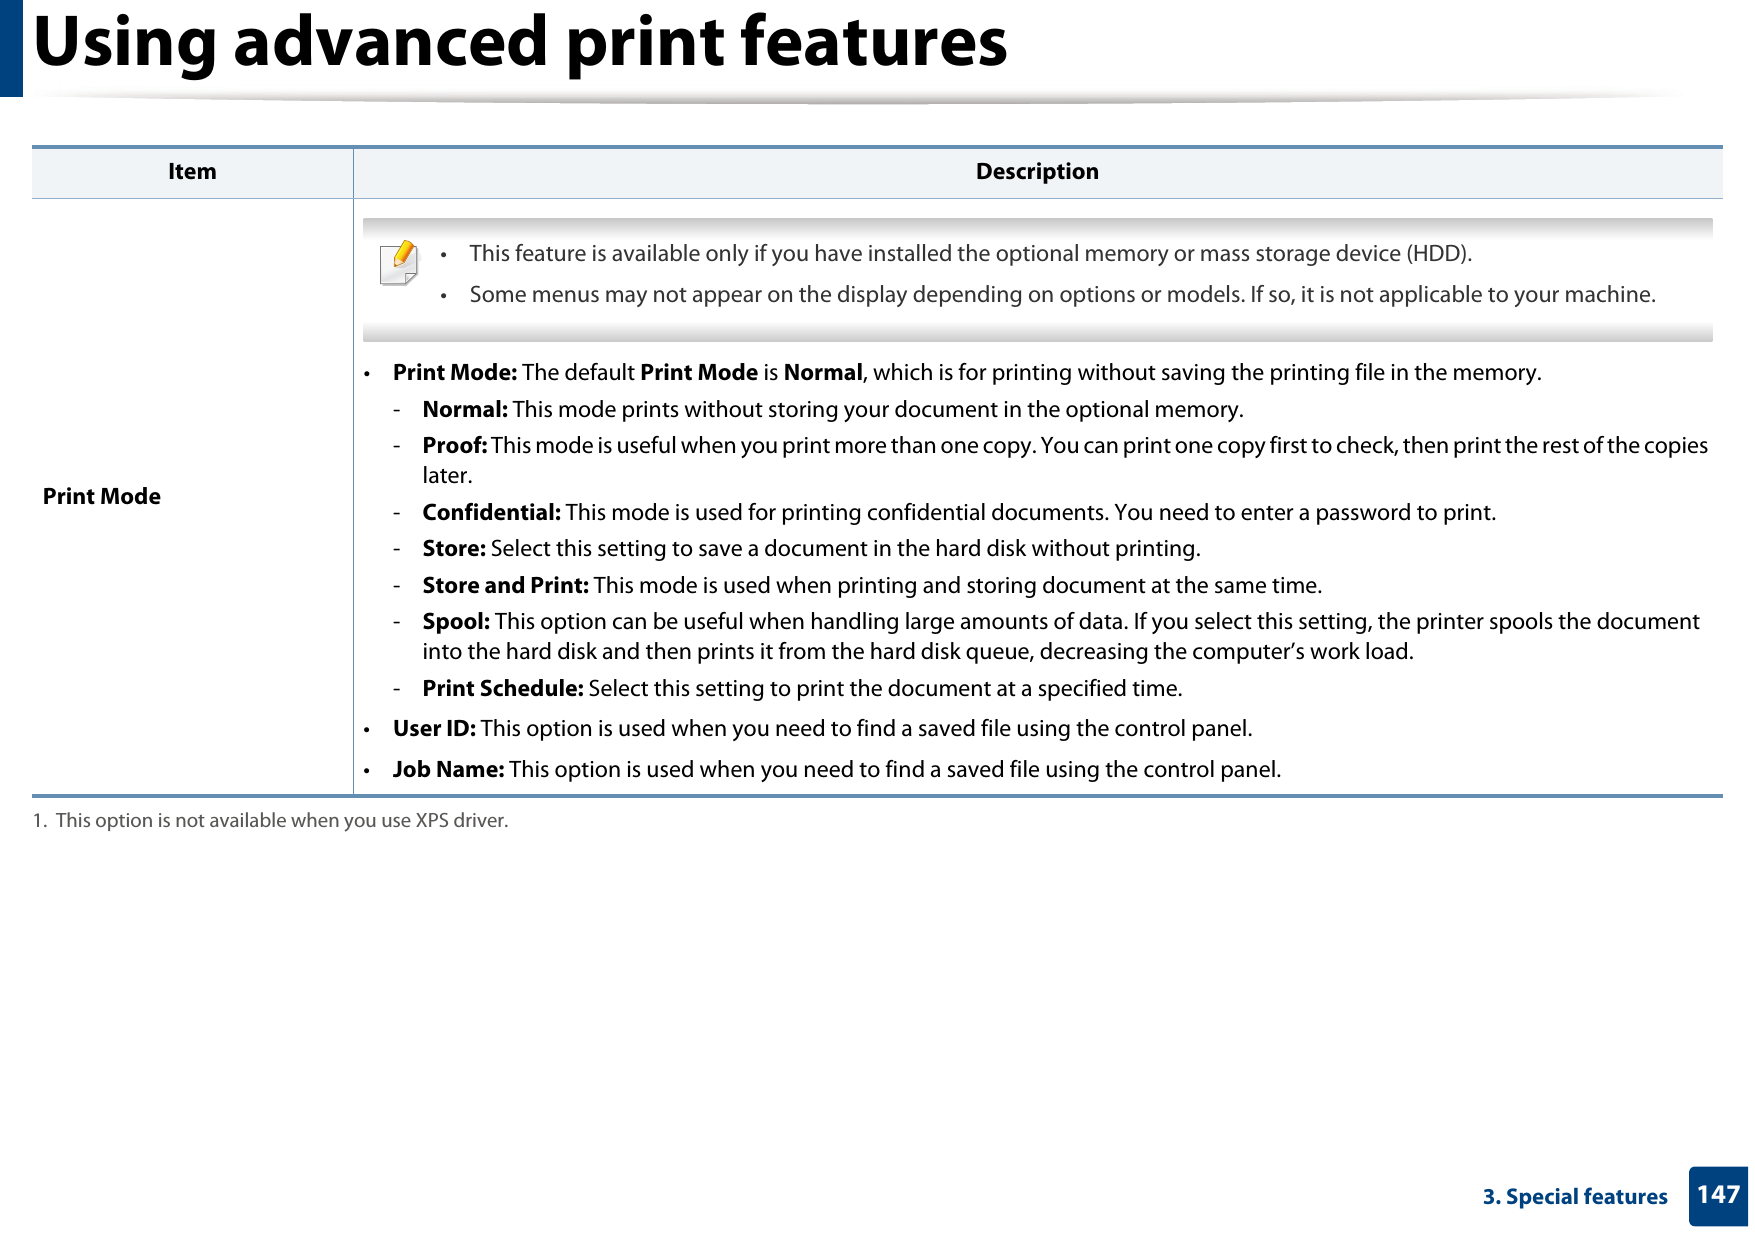 Using advanced print features1473. Special features Print Mode • This feature is available only if you have installed the optional memory or mass storage device (HDD).• Some menus may not appear on the display depending on options or models. If so, it is not applicable to your machine. •Print Mode: The default Print Mode is Normal, which is for printing without saving the printing file in the memory. -Normal: This mode prints without storing your document in the optional memory. -Proof: This mode is useful when you print more than one copy. You can print one copy first to check, then print the rest of the copies later. -Confidential: This mode is used for printing confidential documents. You need to enter a password to print. -Store: Select this setting to save a document in the hard disk without printing. -Store and Print: This mode is used when printing and storing document at the same time.-Spool: This option can be useful when handling large amounts of data. If you select this setting, the printer spools the document into the hard disk and then prints it from the hard disk queue, decreasing the computer’s work load.-Print Schedule: Select this setting to print the document at a specified time.•User ID: This option is used when you need to find a saved file using the control panel. •Job Name: This option is used when you need to find a saved file using the control panel. 1. This option is not available when you use XPS driver.Item Description